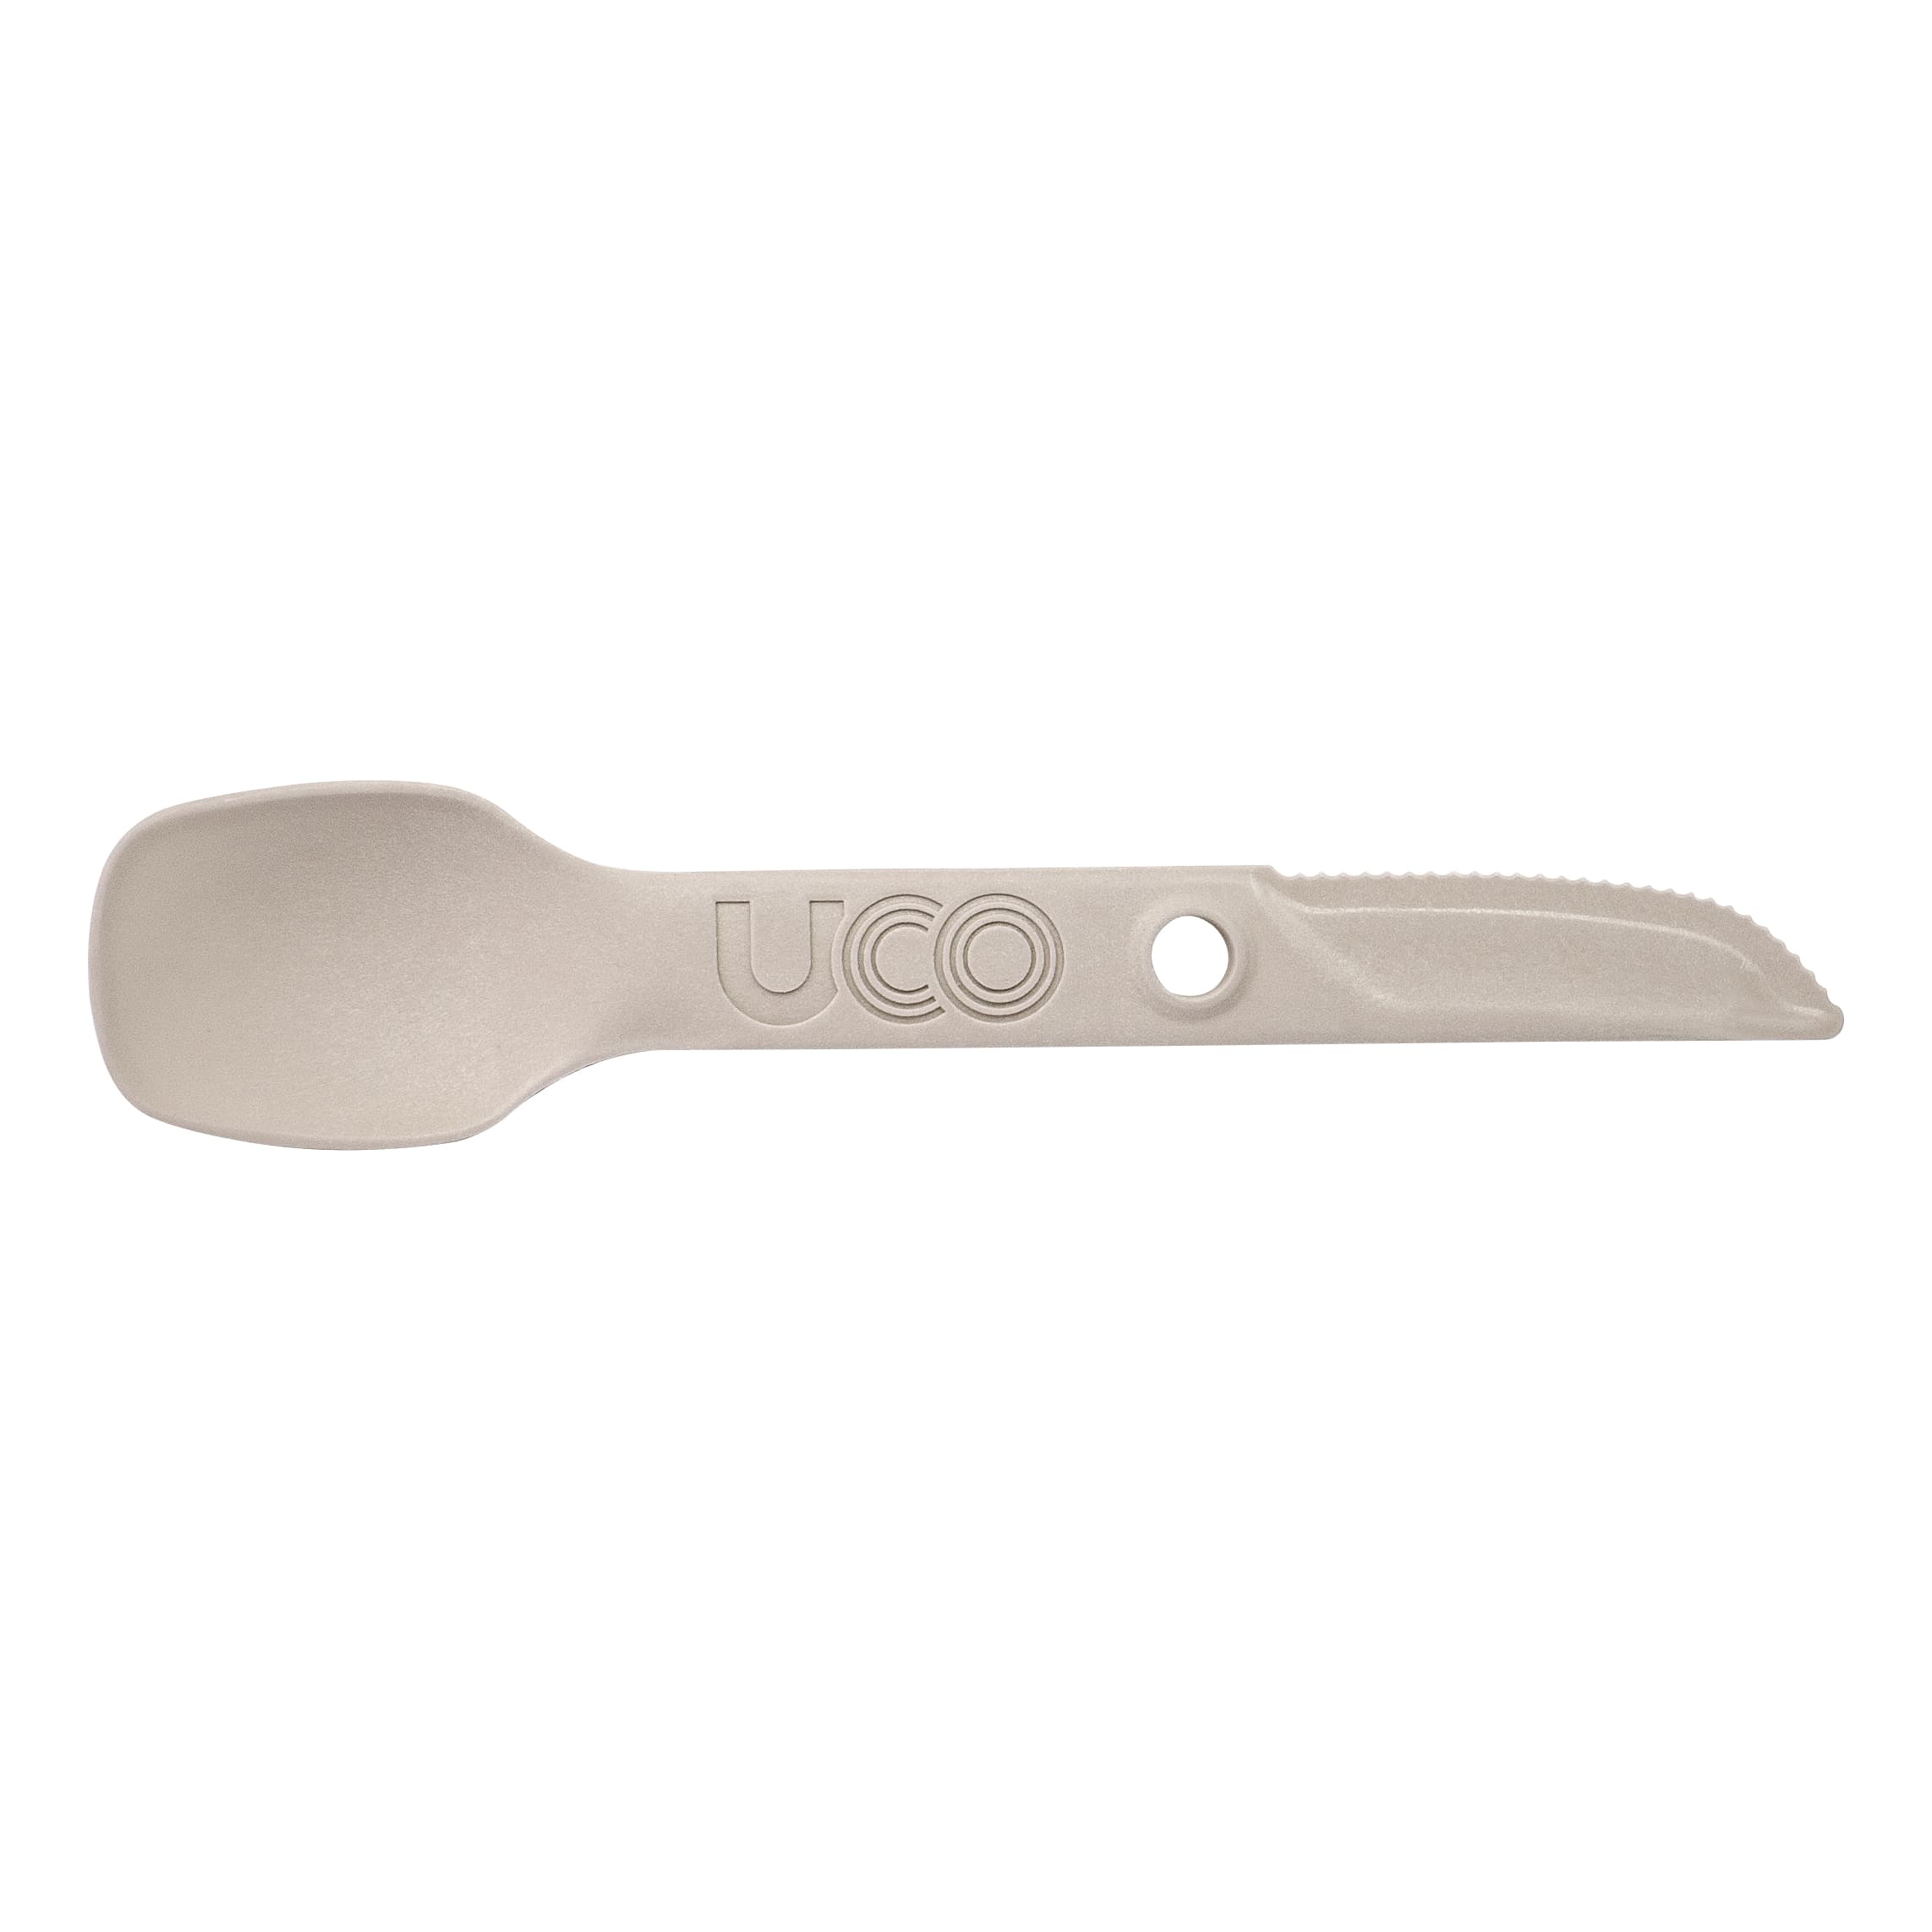 UCO Switch Spork Utensil - Sandstone - Knife and Spoon View